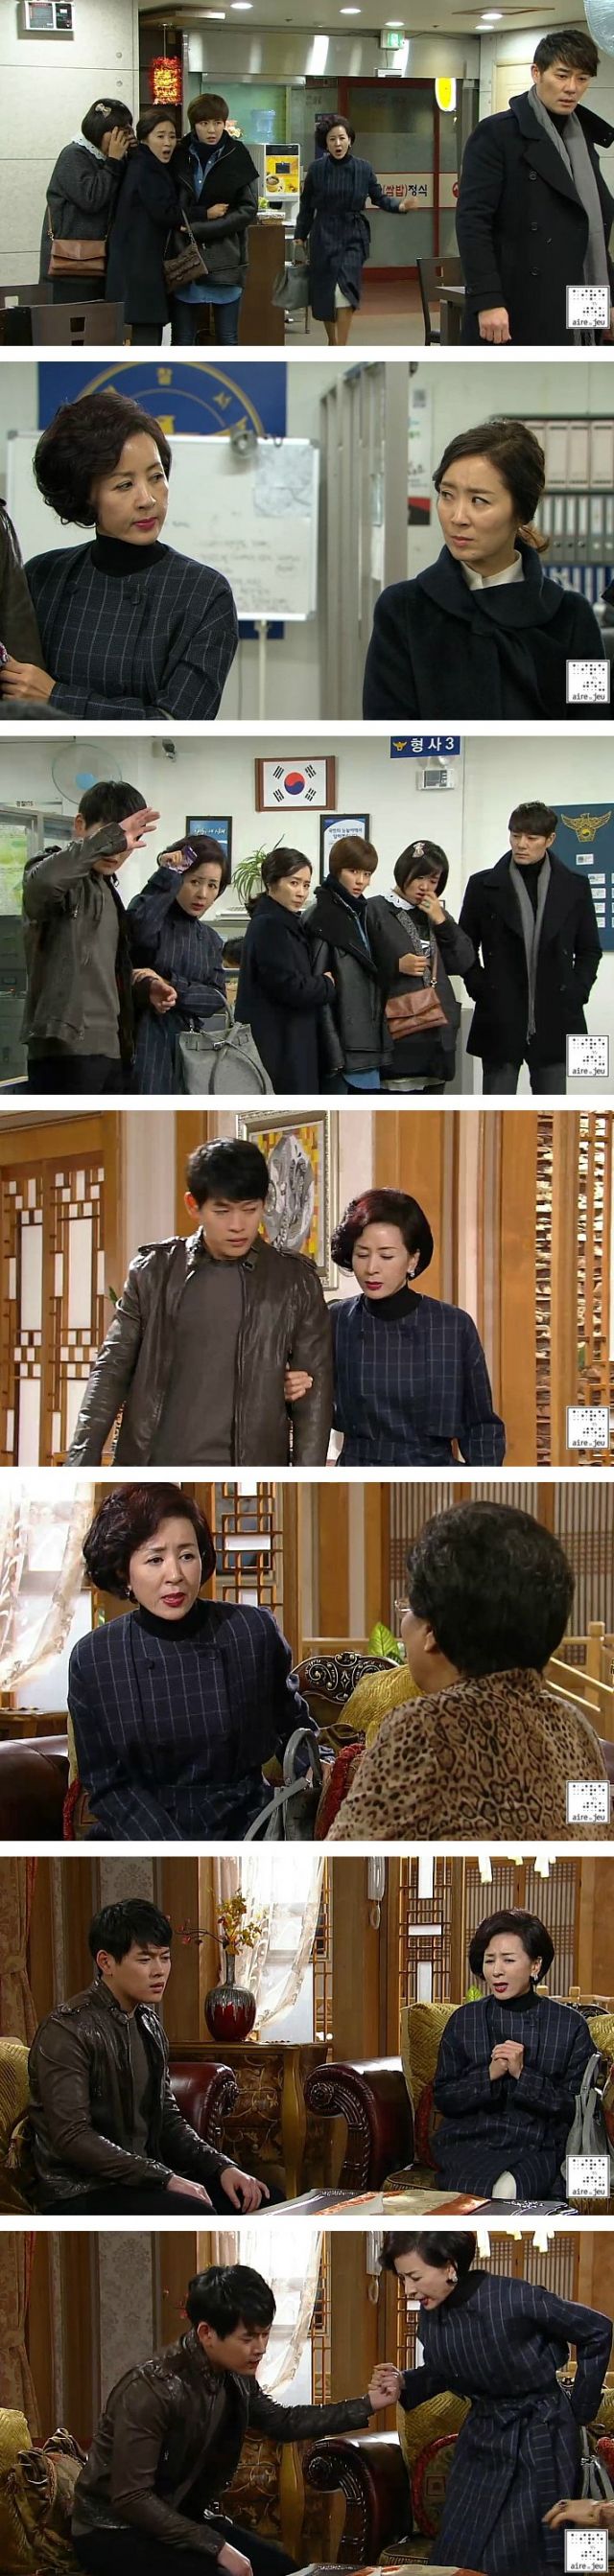 episode 8 captures for the Korean drama 'Greatest Marriage'